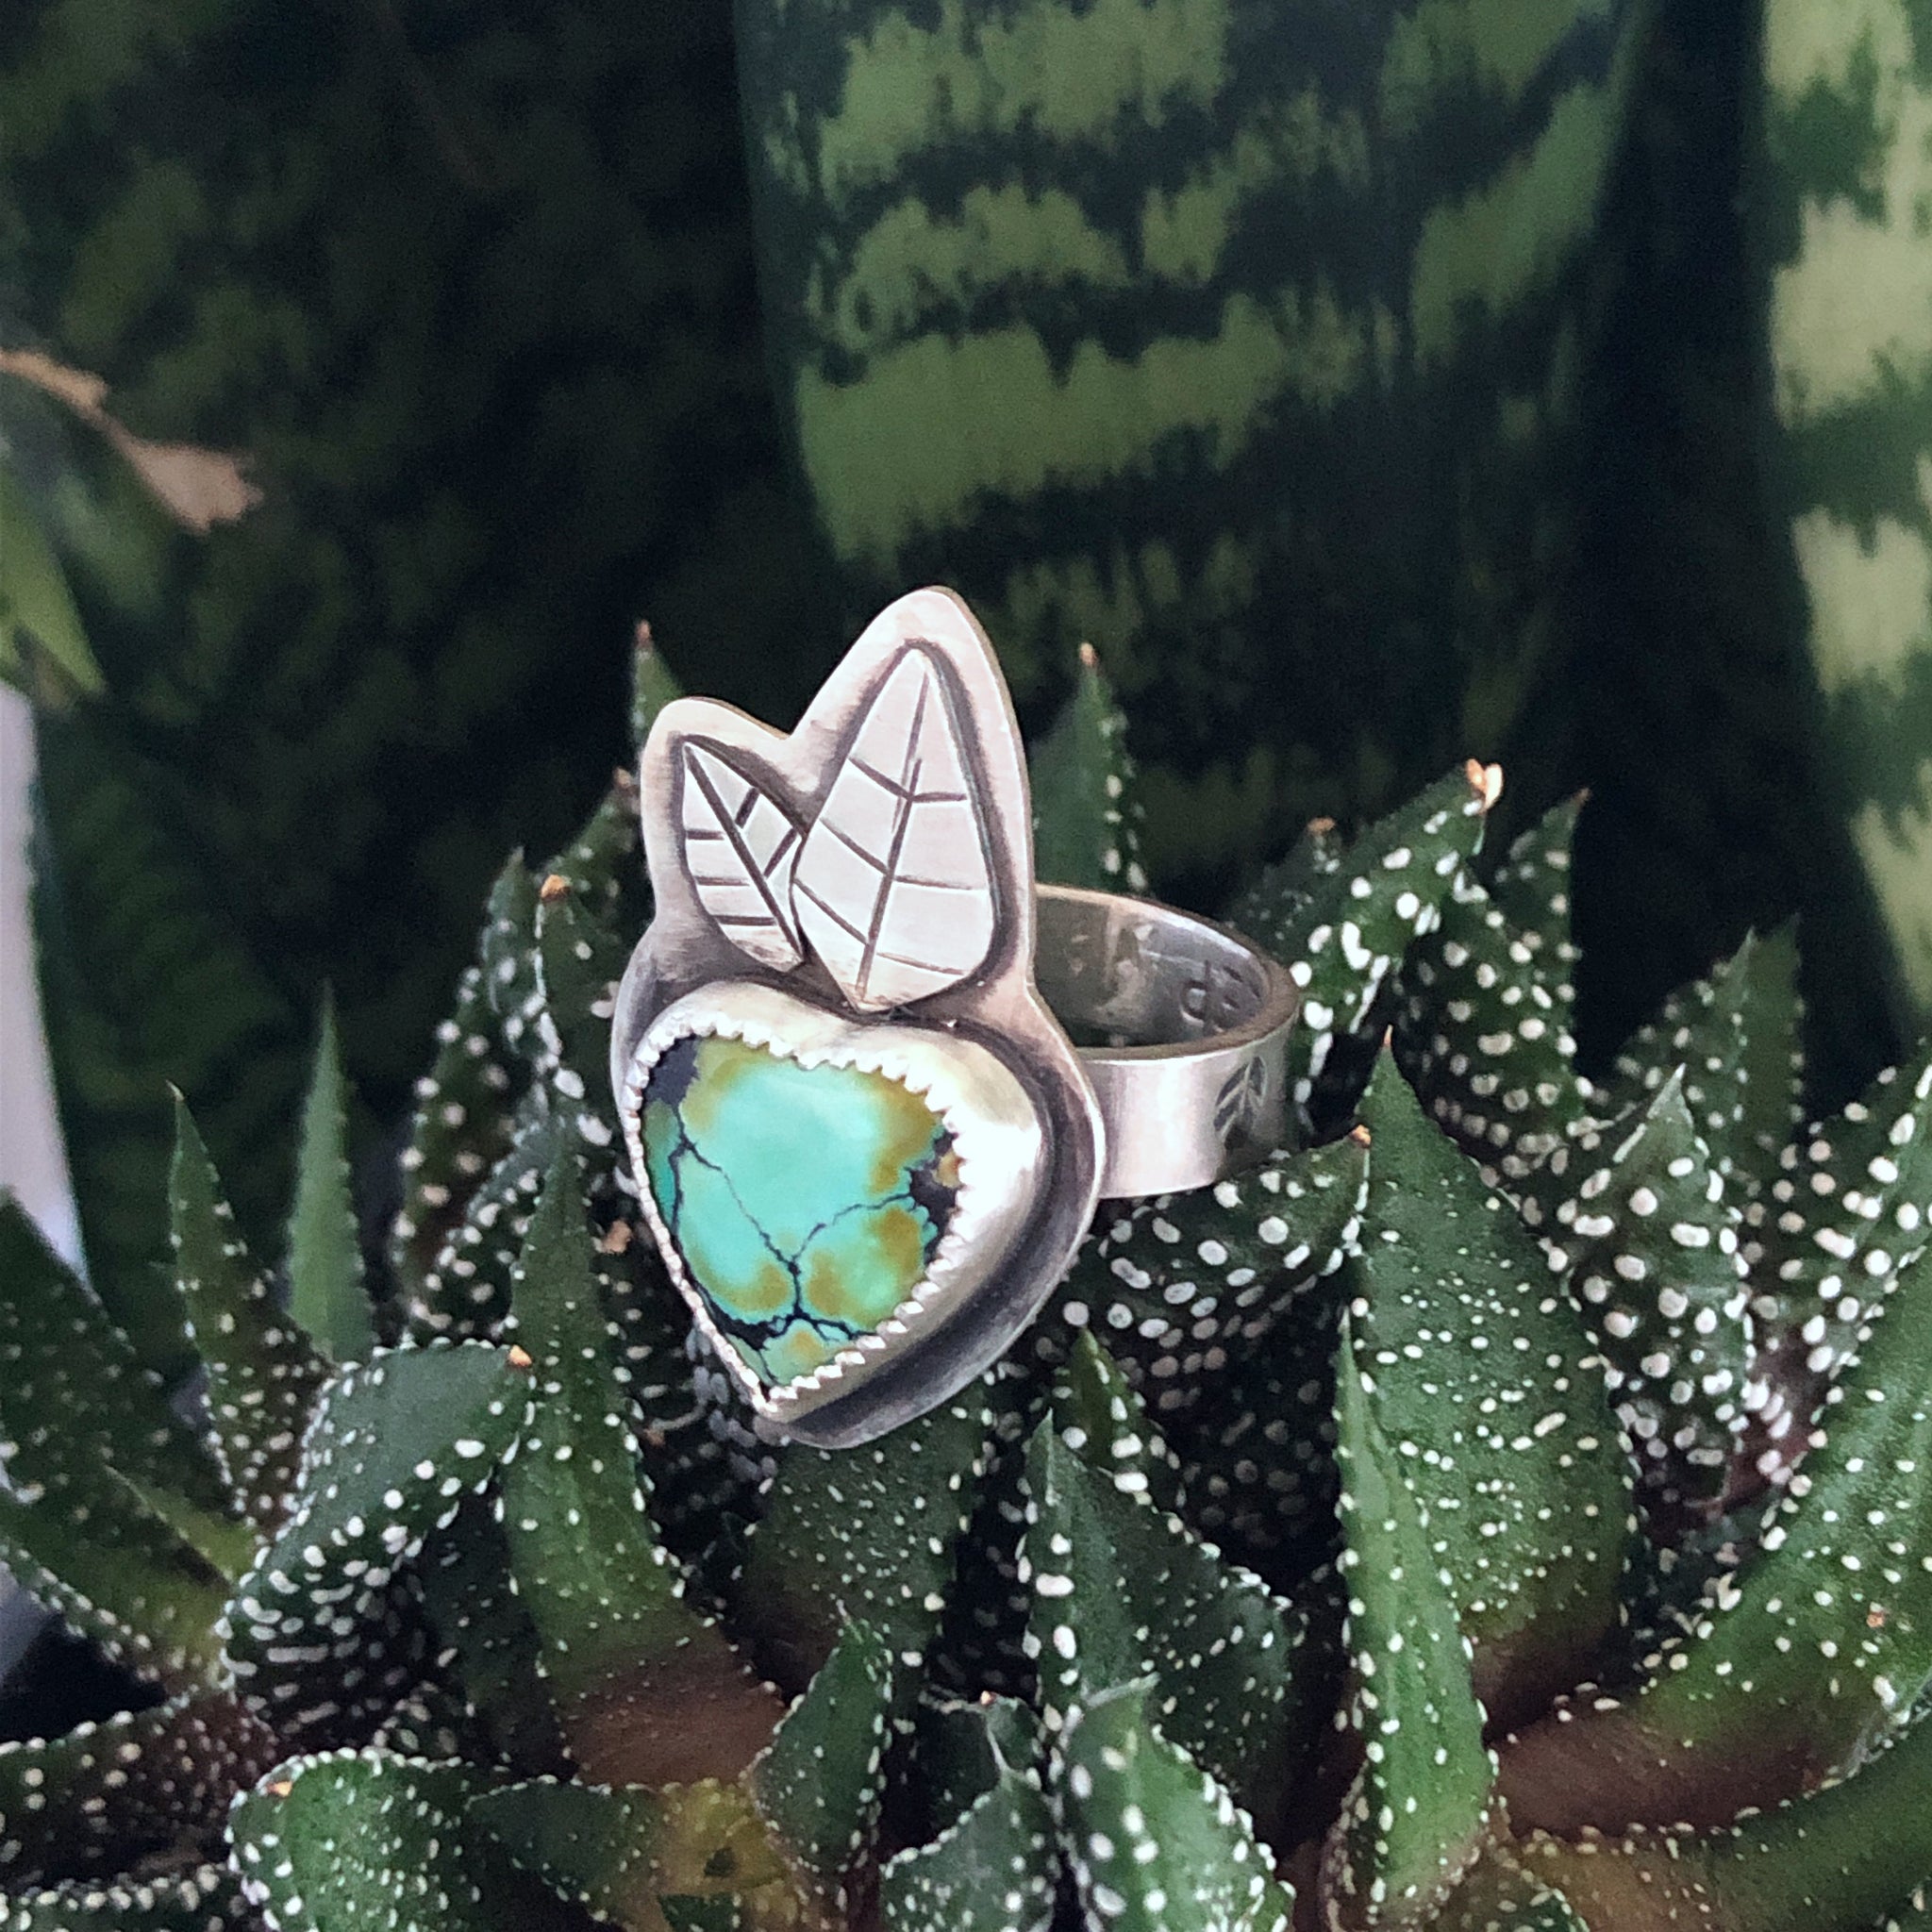 Turquoise Heart Blossom Ring (7.25) – Crow Totem Arts by B. Worsfold